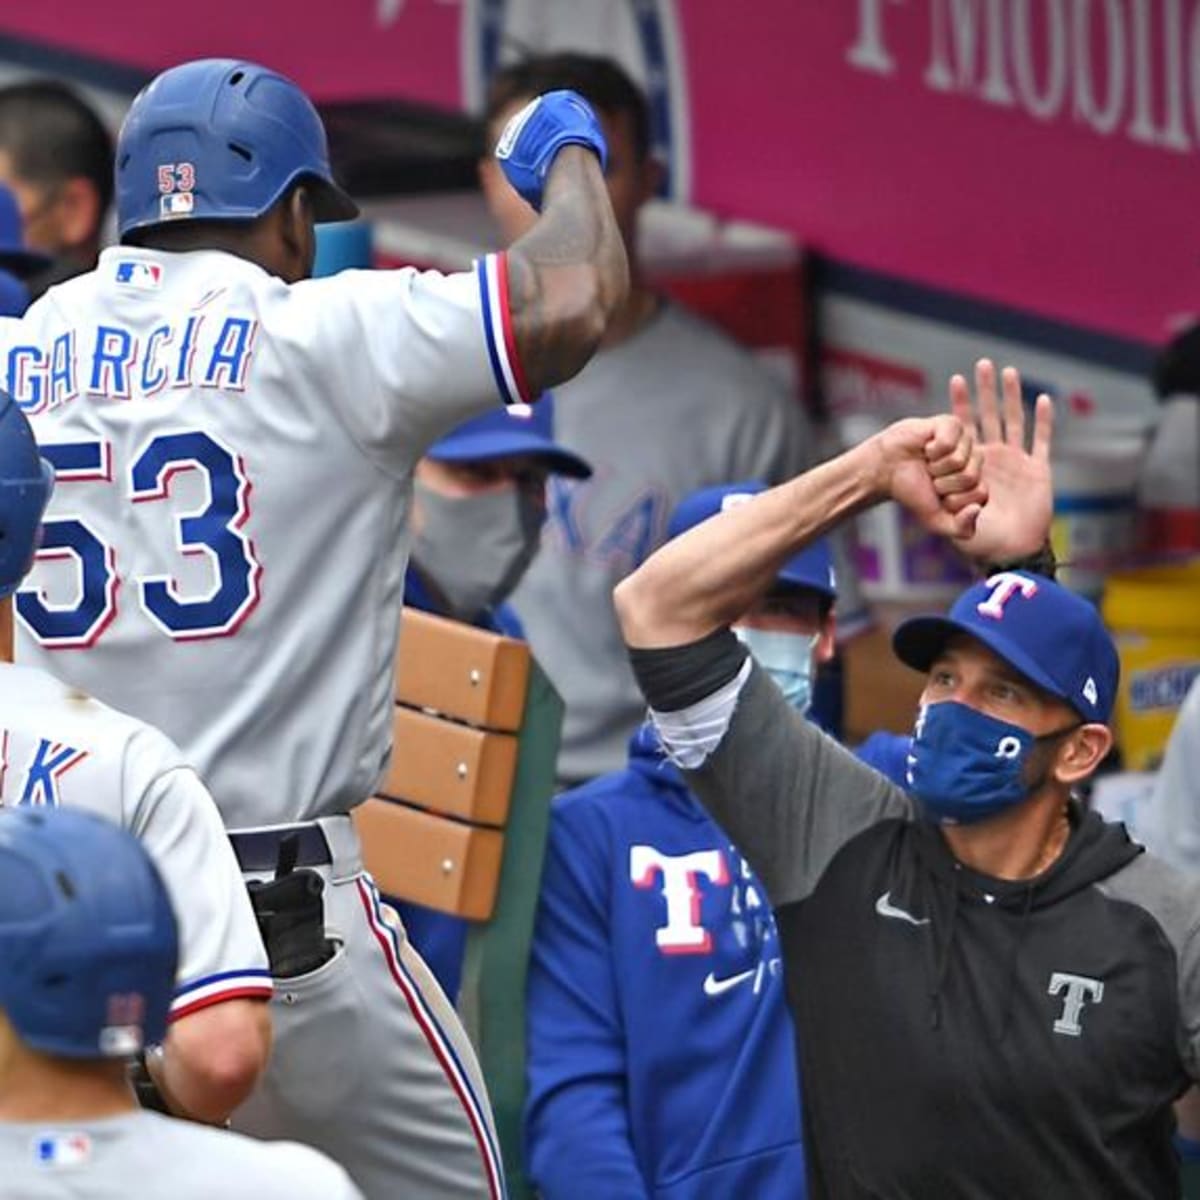 Rangers slugger Adolis García, leading the AL in RBIs, exits game after  getting hit by a pitch - The San Diego Union-Tribune